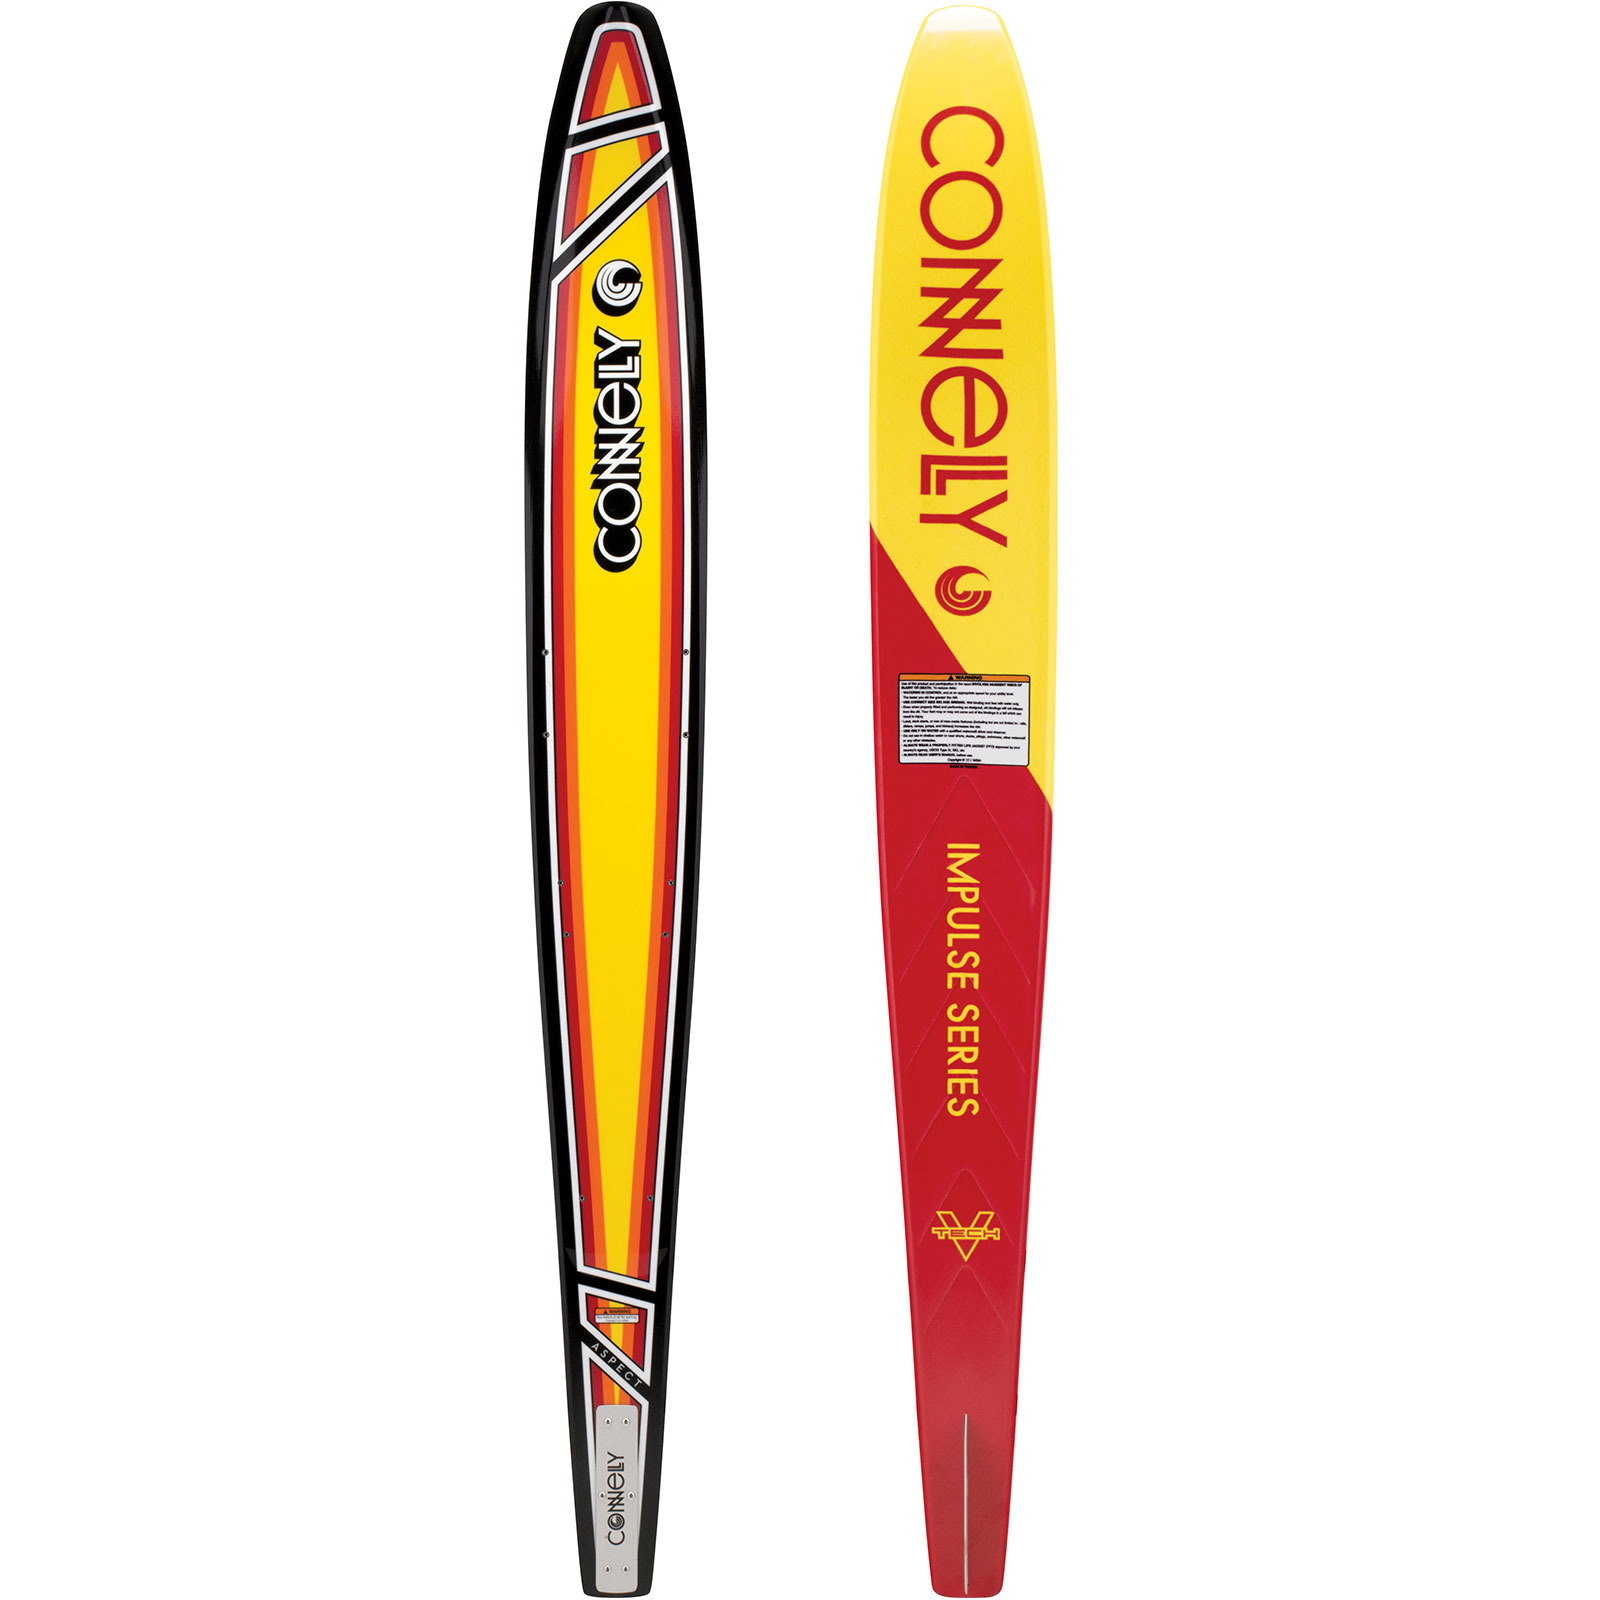   ASPECT WATERSKI CONNELLY 2019